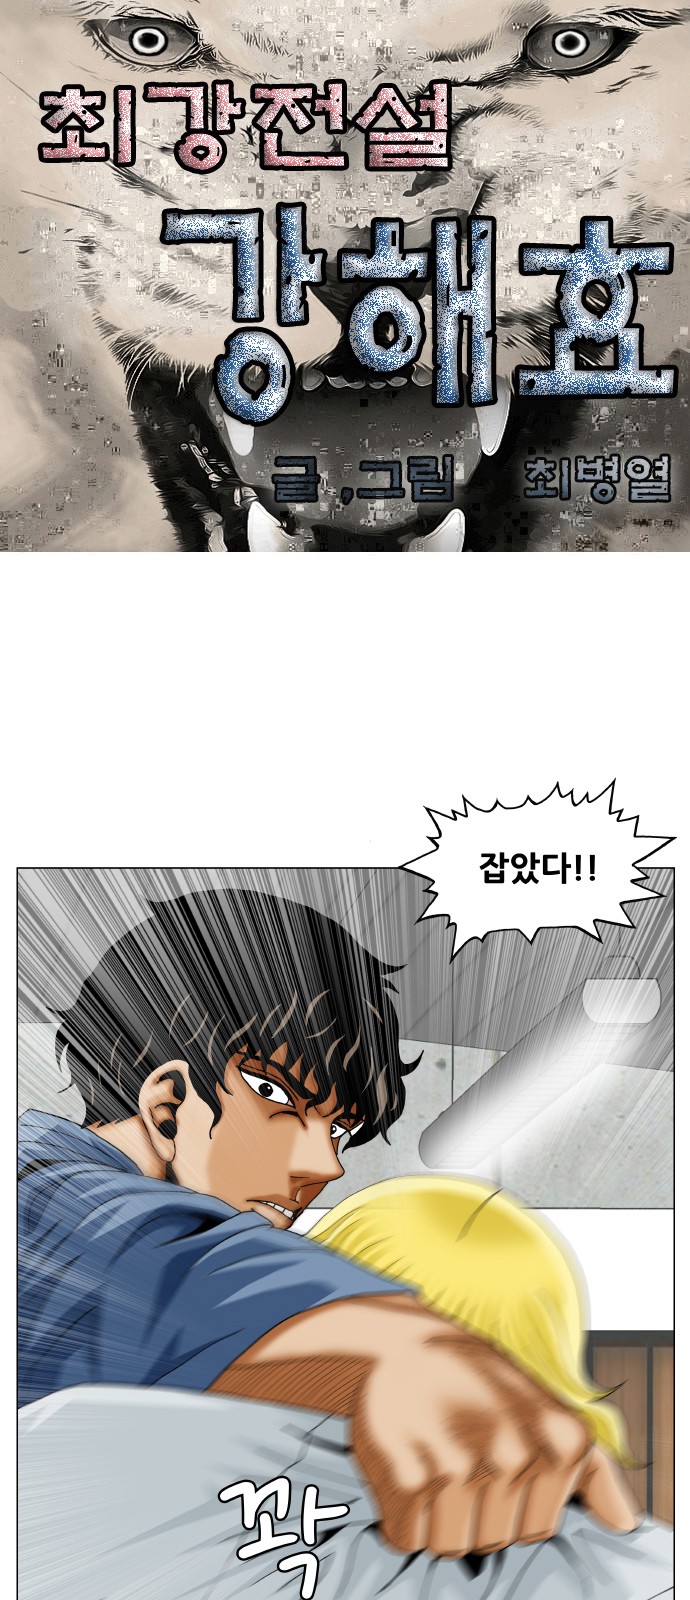 Ultimate Legend - Kang Hae Hyo - Chapter 374 - Page 1